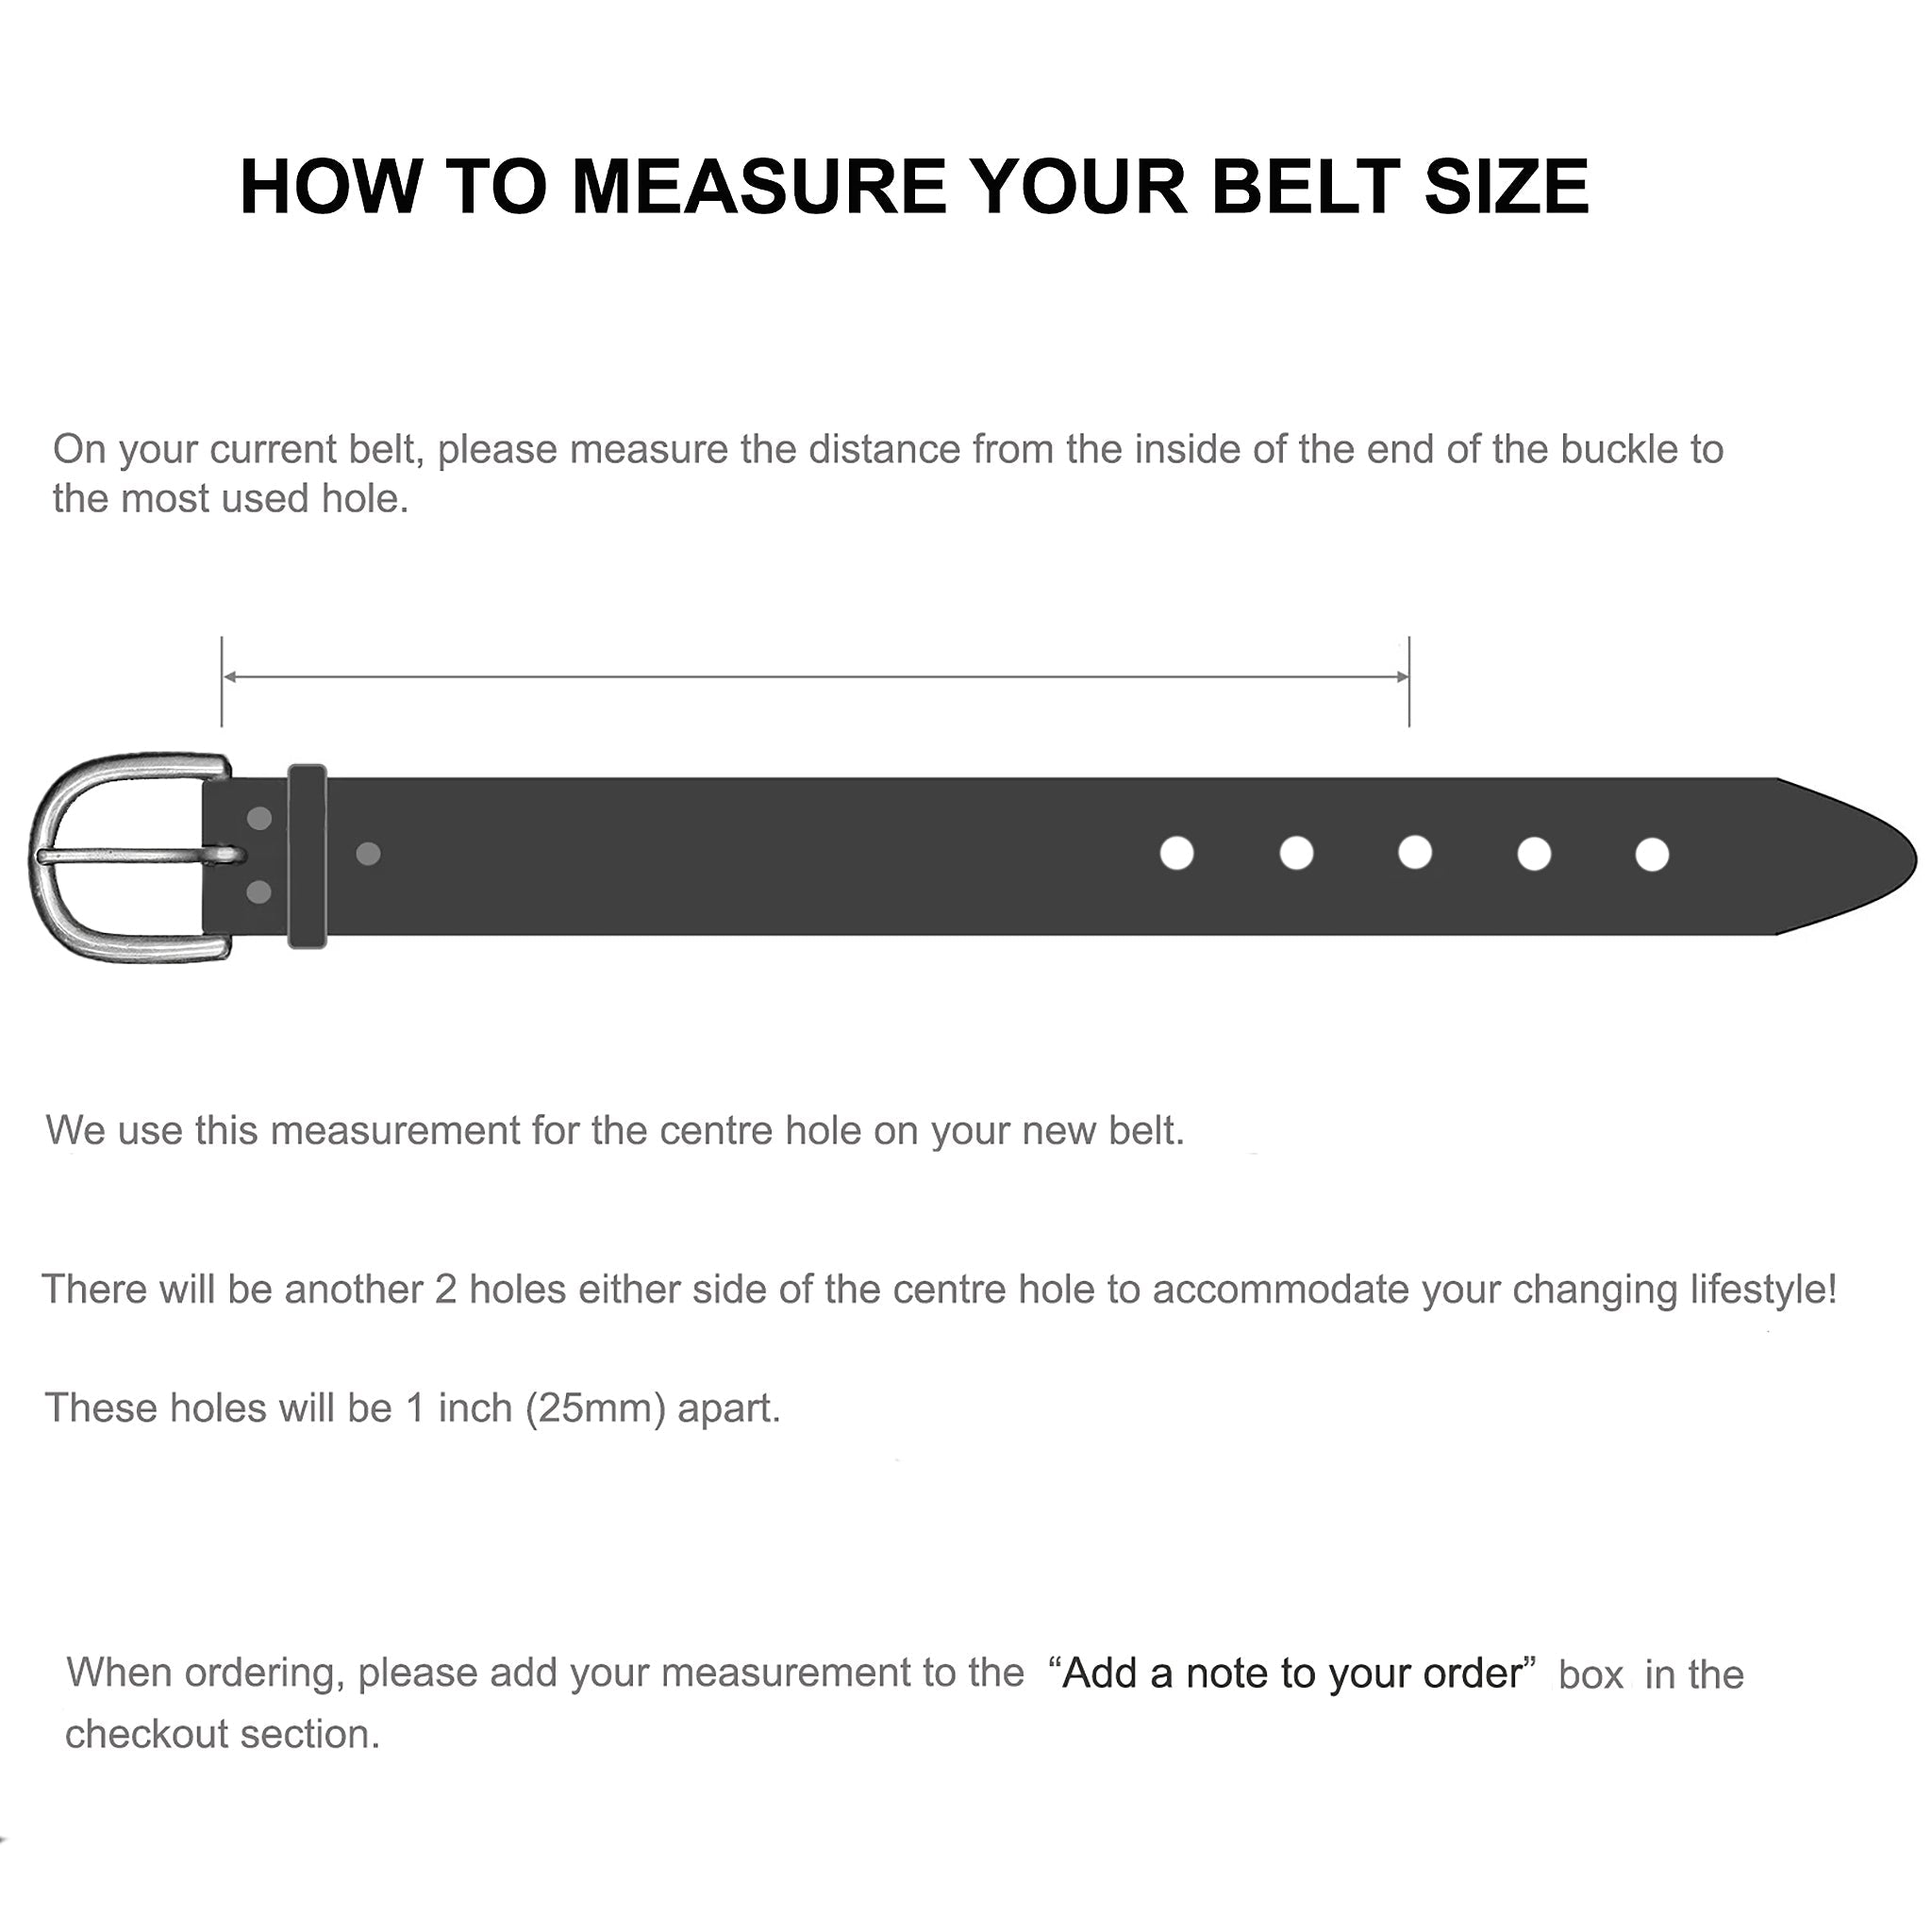 How to Measure Your Belt Size by The Viking Dragon